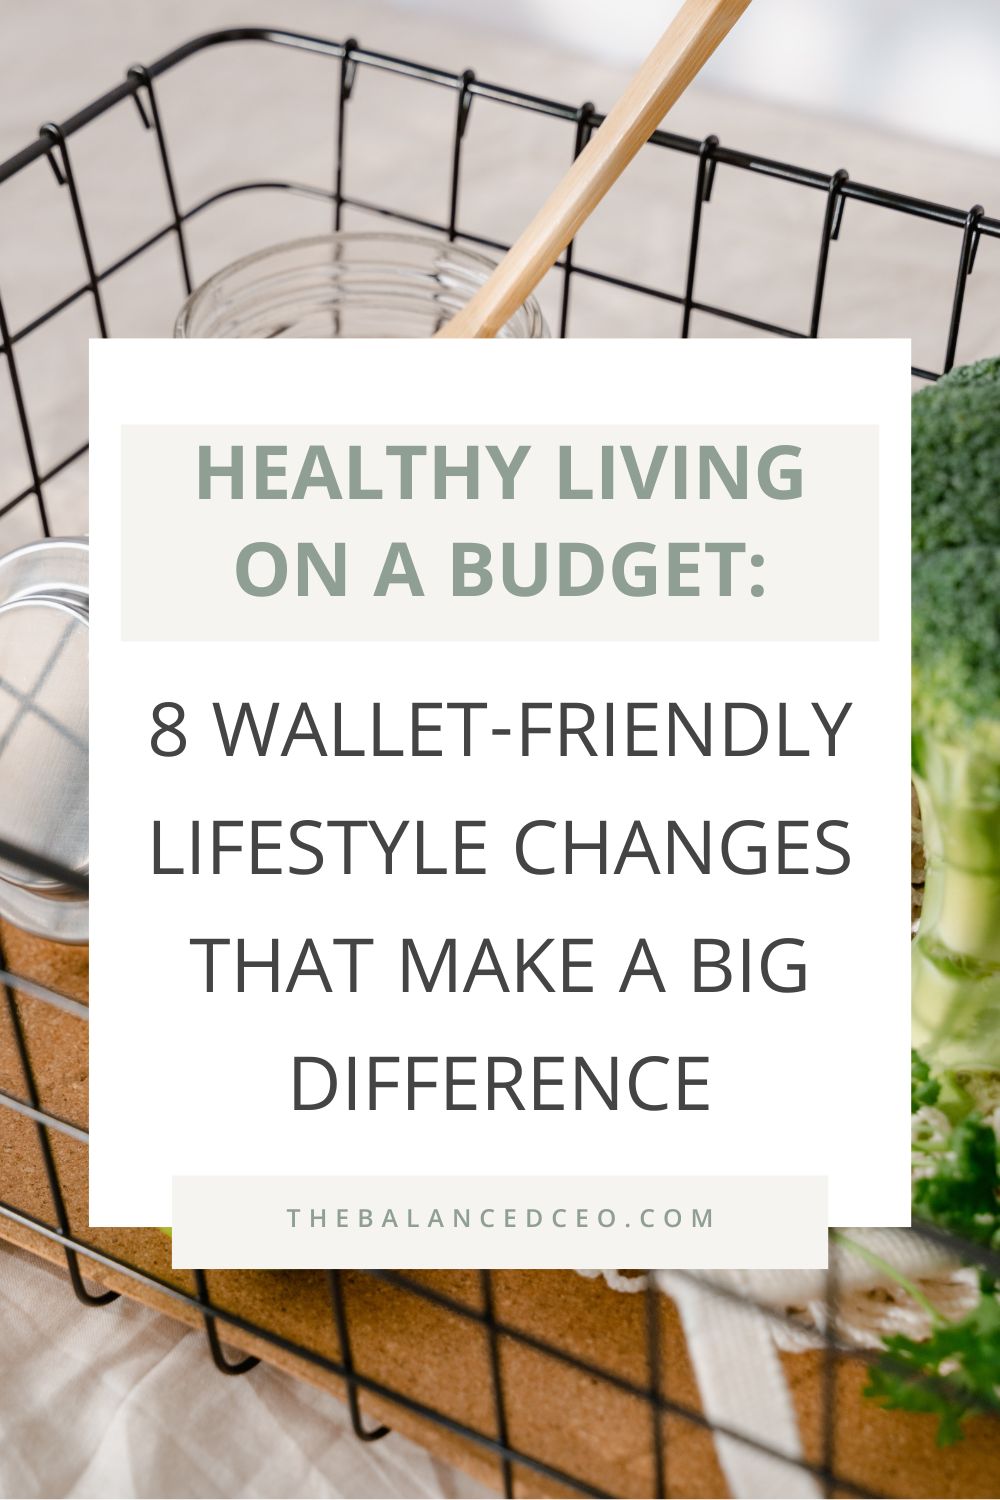 Healthy Living on a Budget: 8 Wallet-Friendly Lifestyle Changes That Make a Big Difference